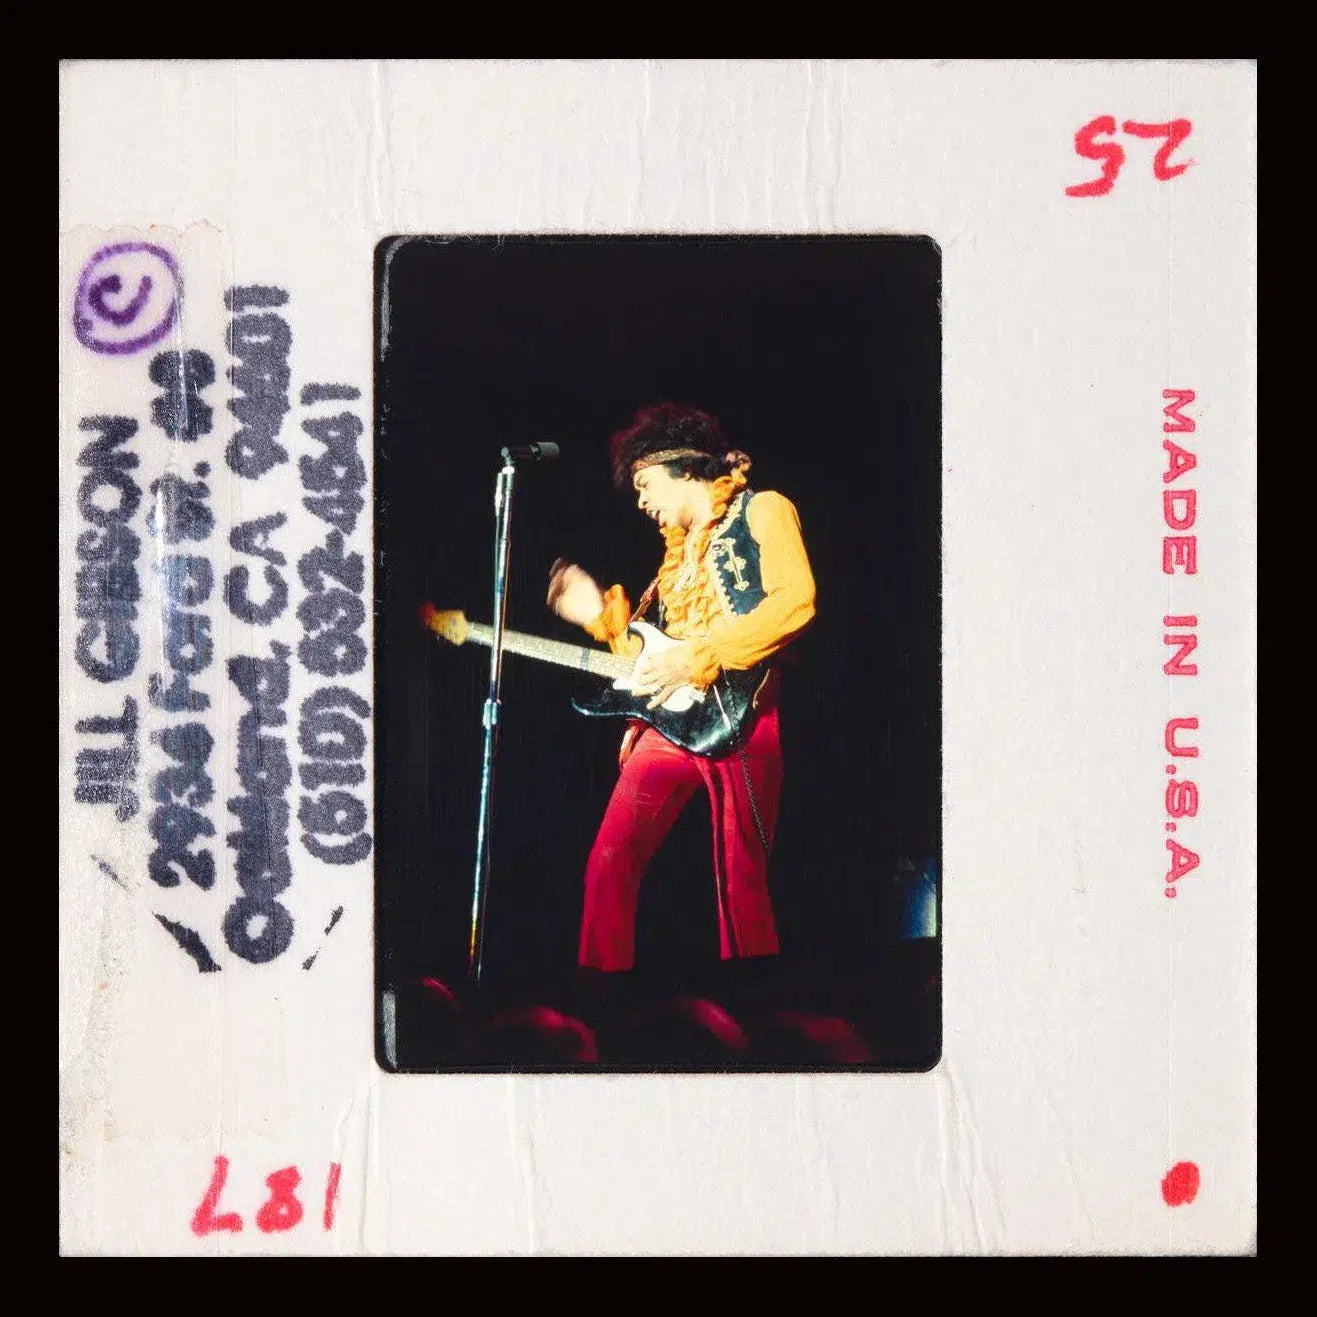 Jimi Hendrix - Slide 1, from The Wild Ones collection-PurePhoto